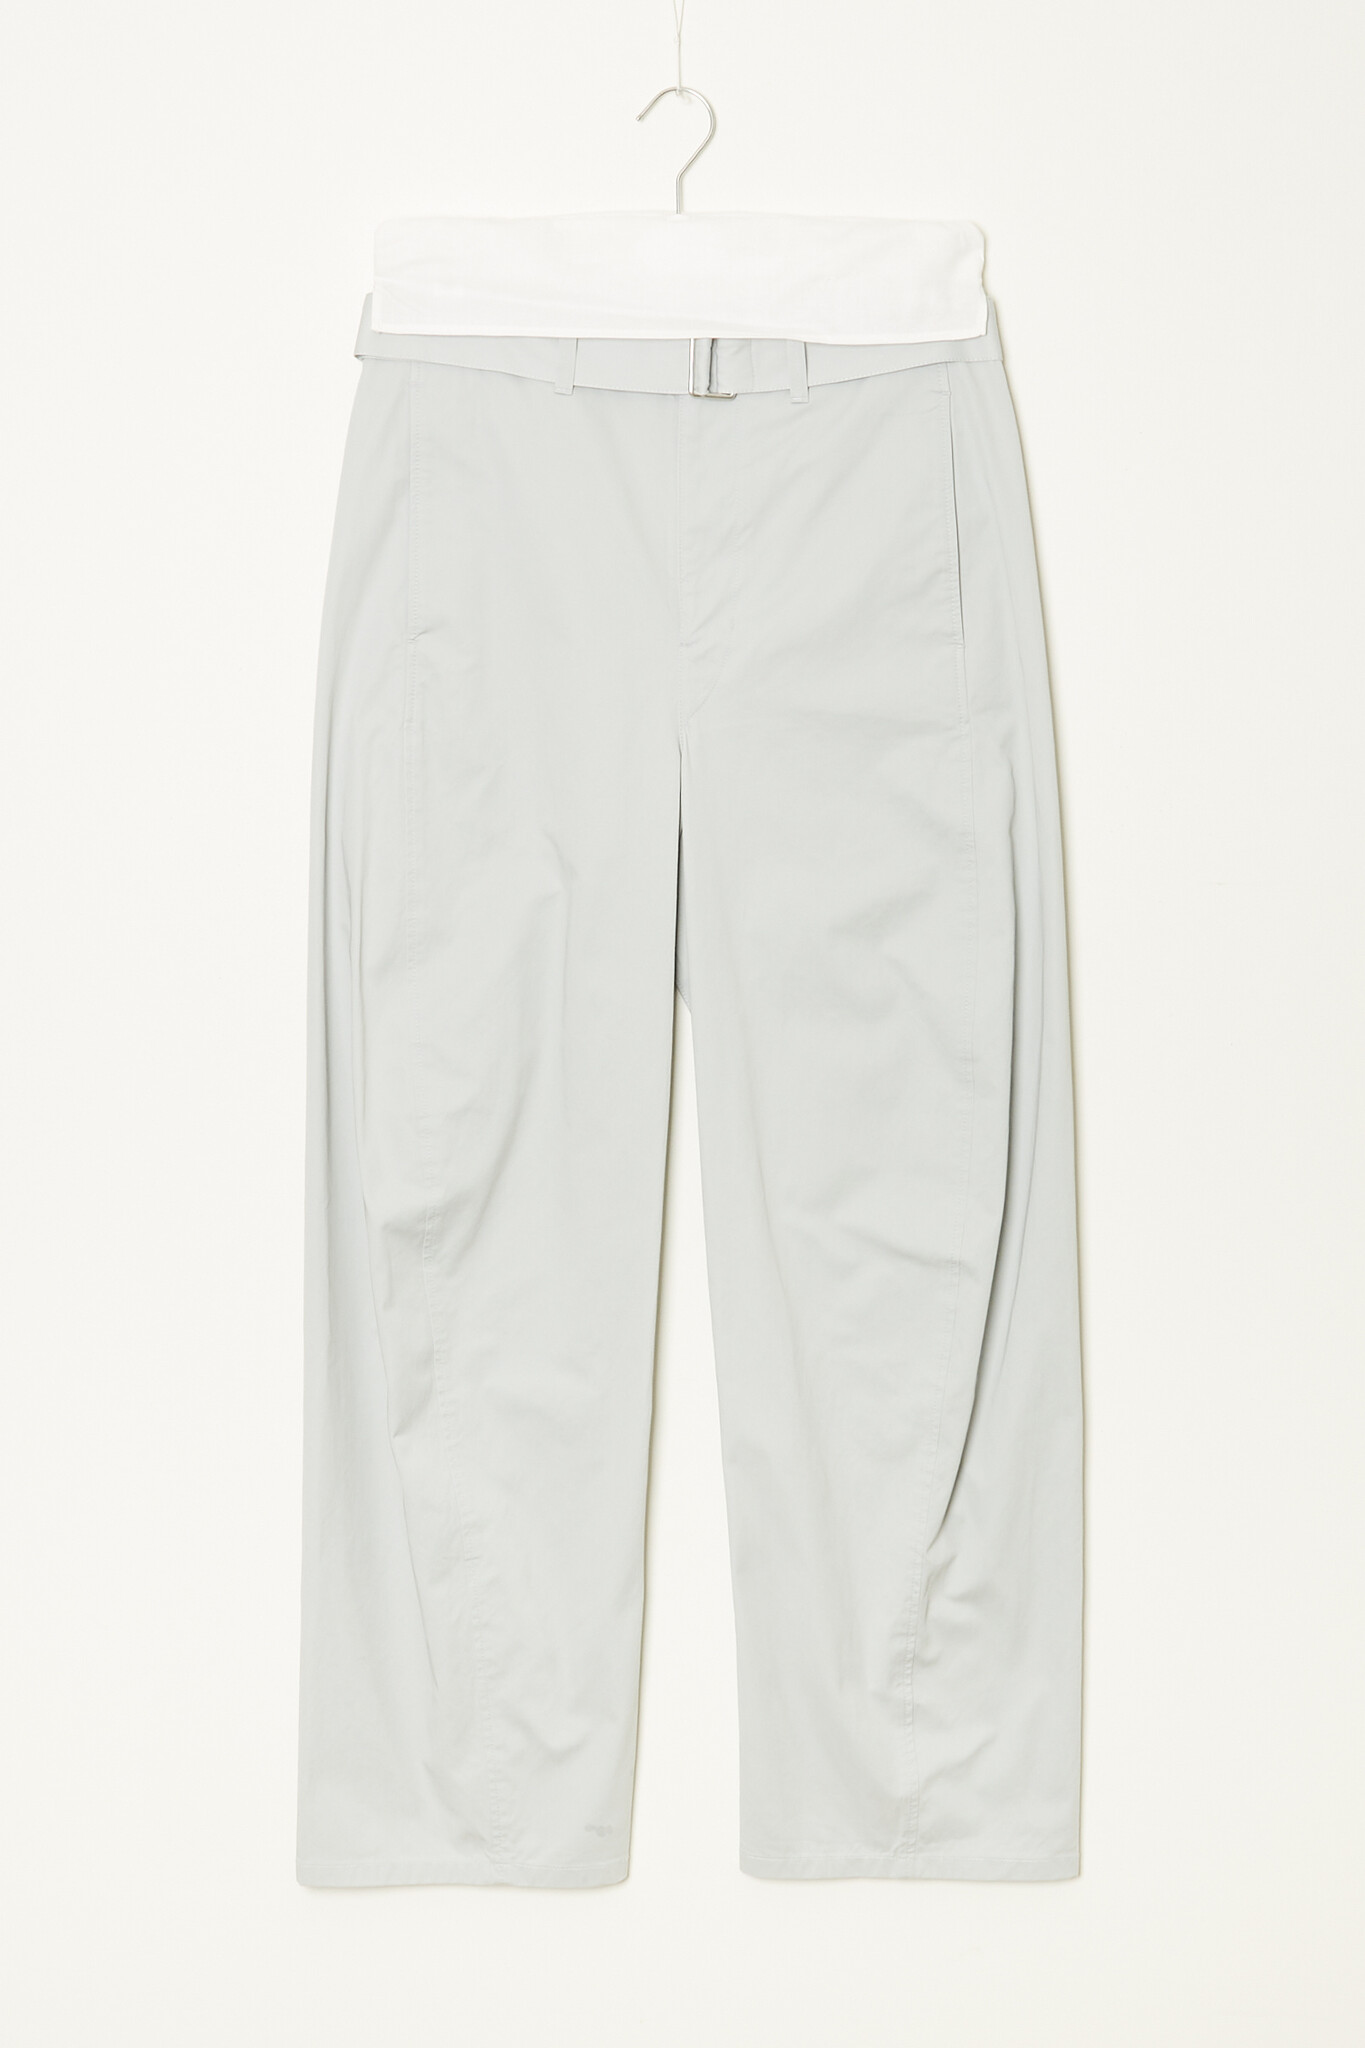 Lemaire Twisted Short in Light Grey